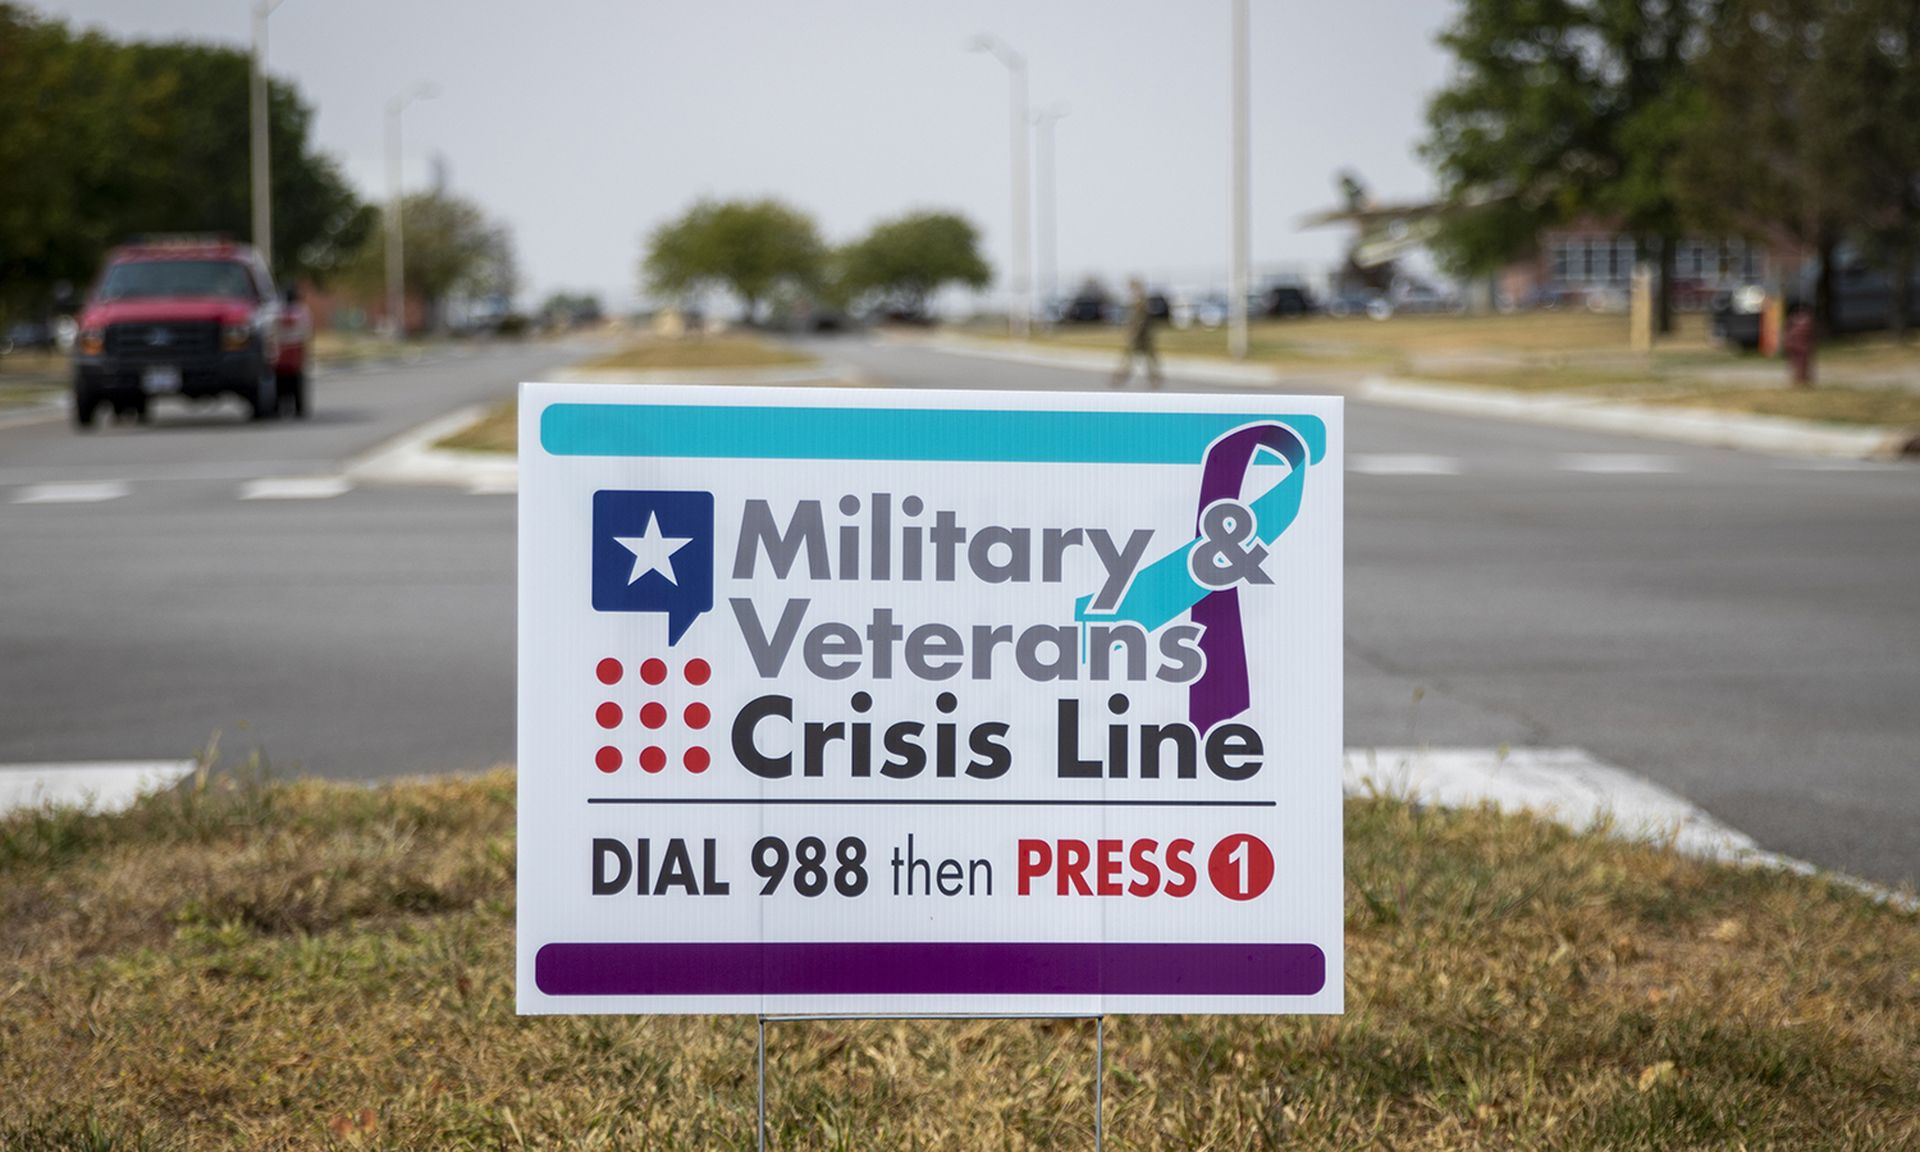 A sign for the Military and Veterans Crisis Line